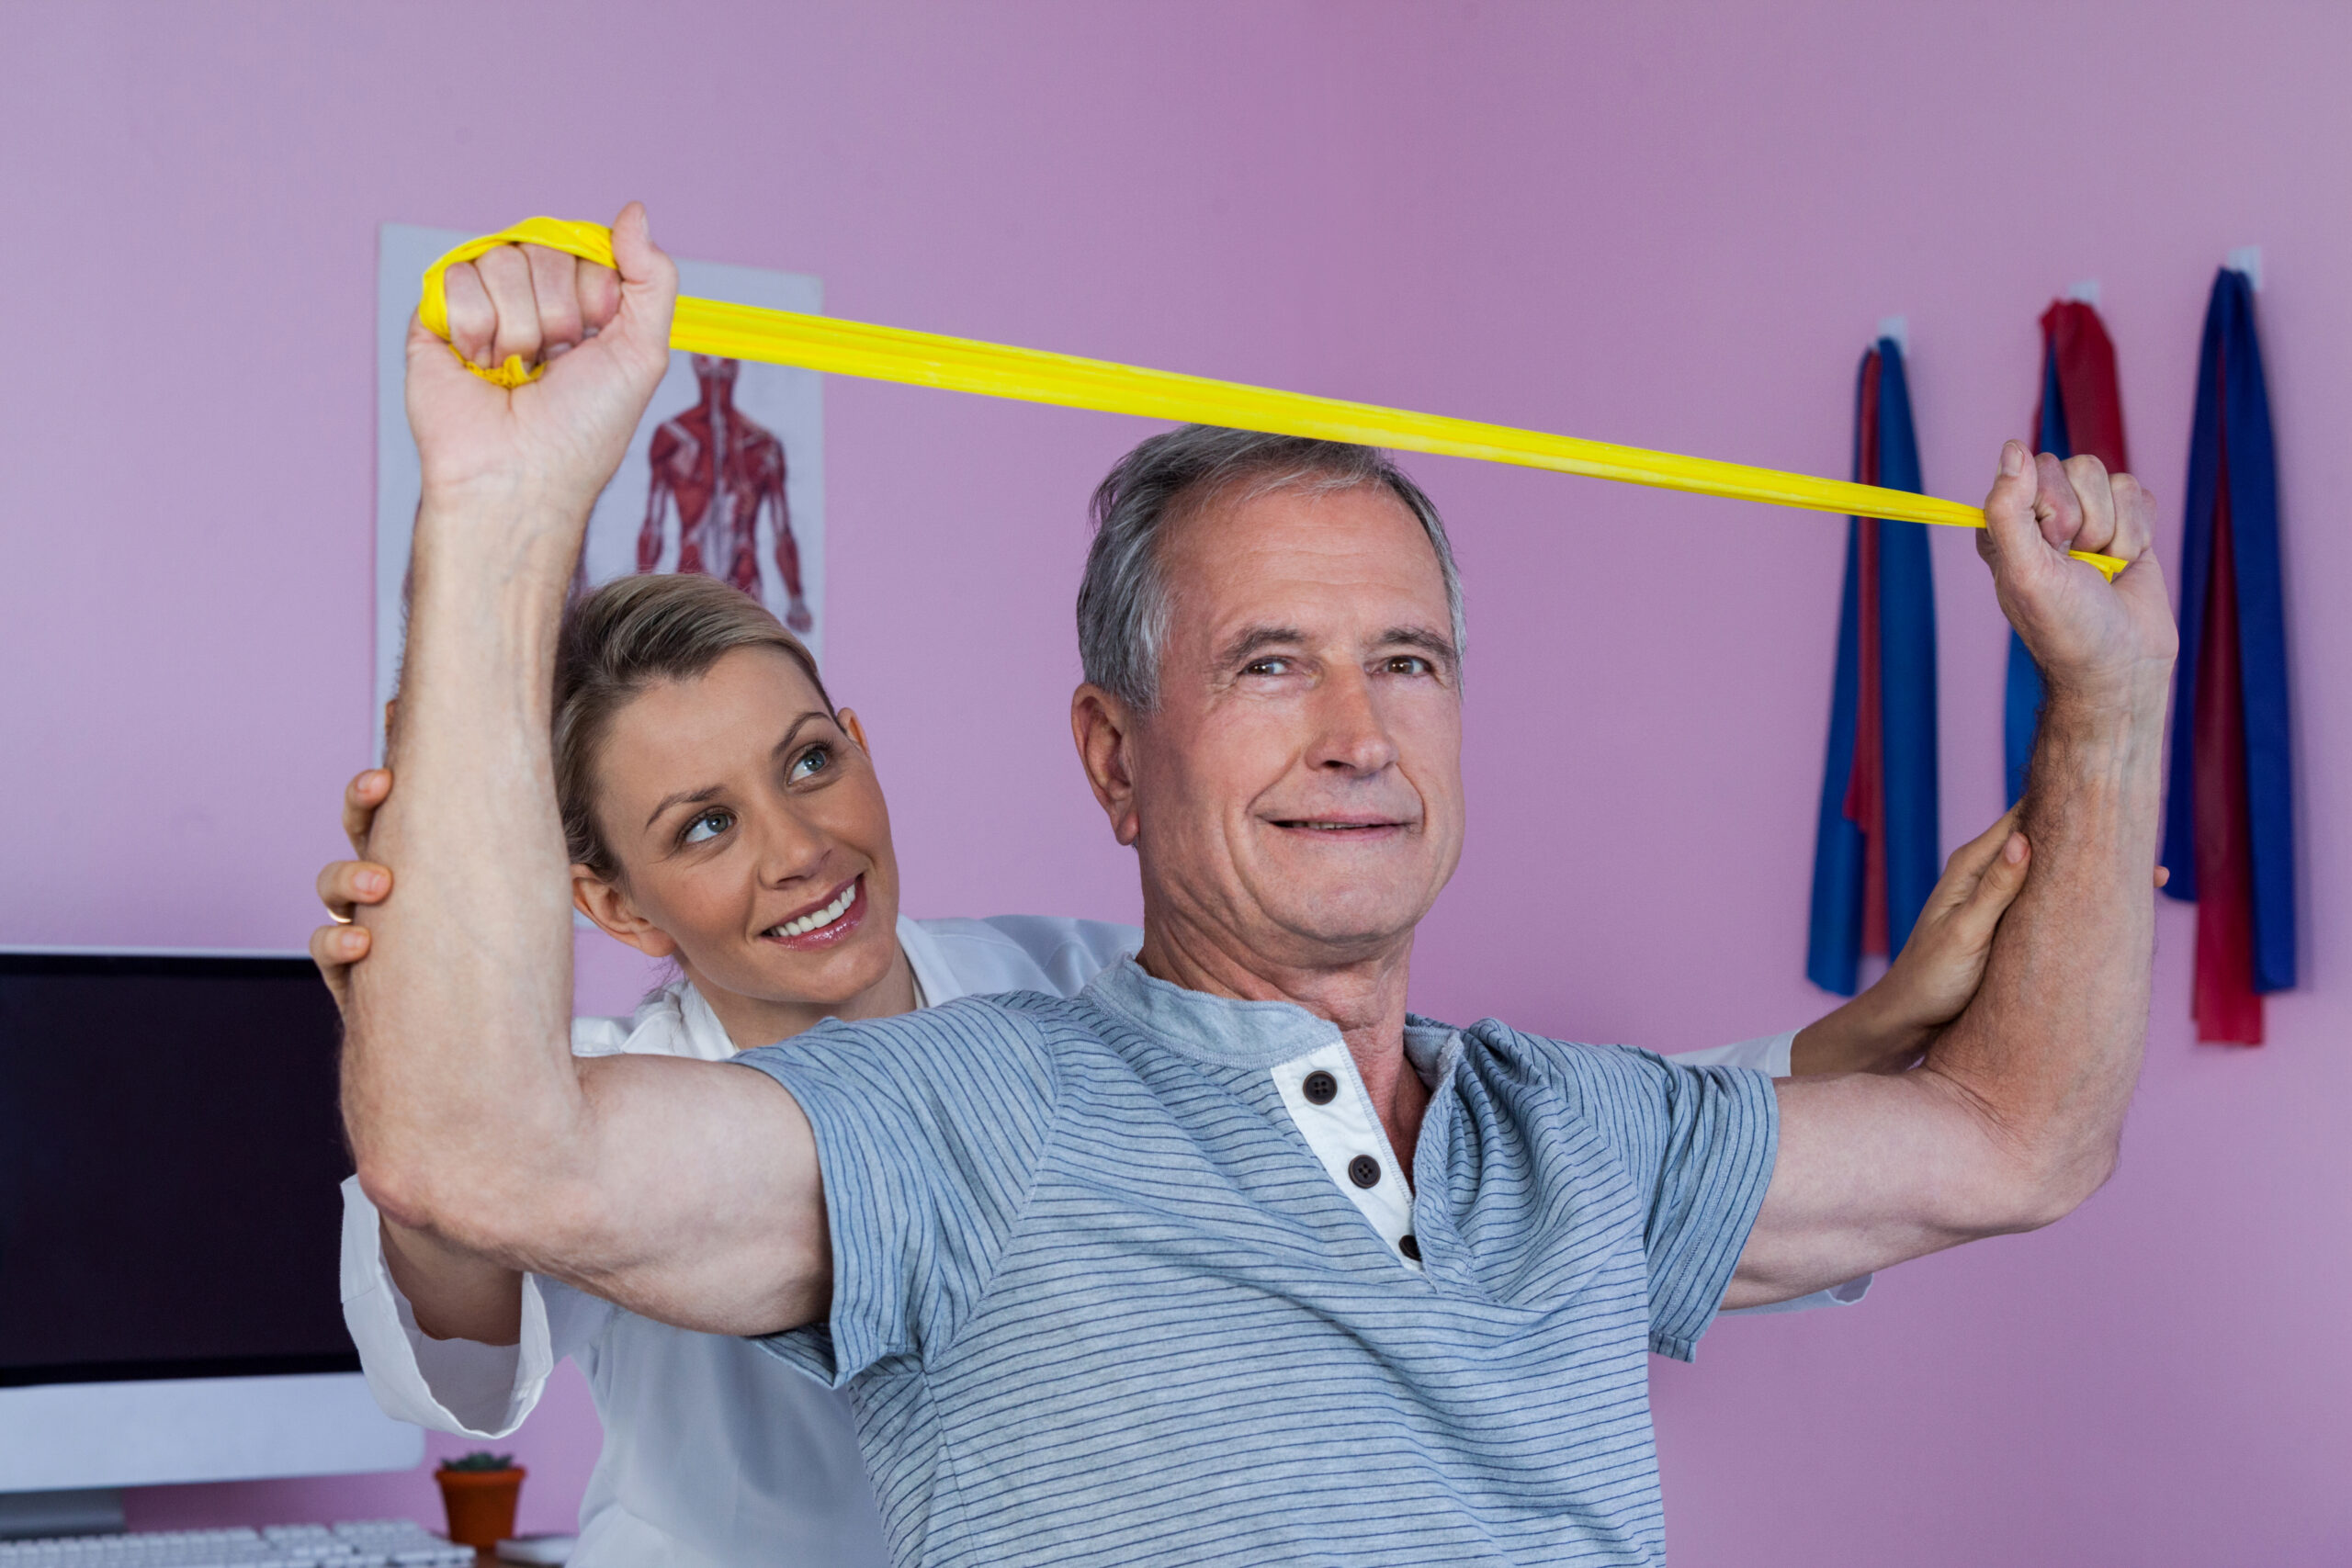 Resistance band physiotherapy exercises